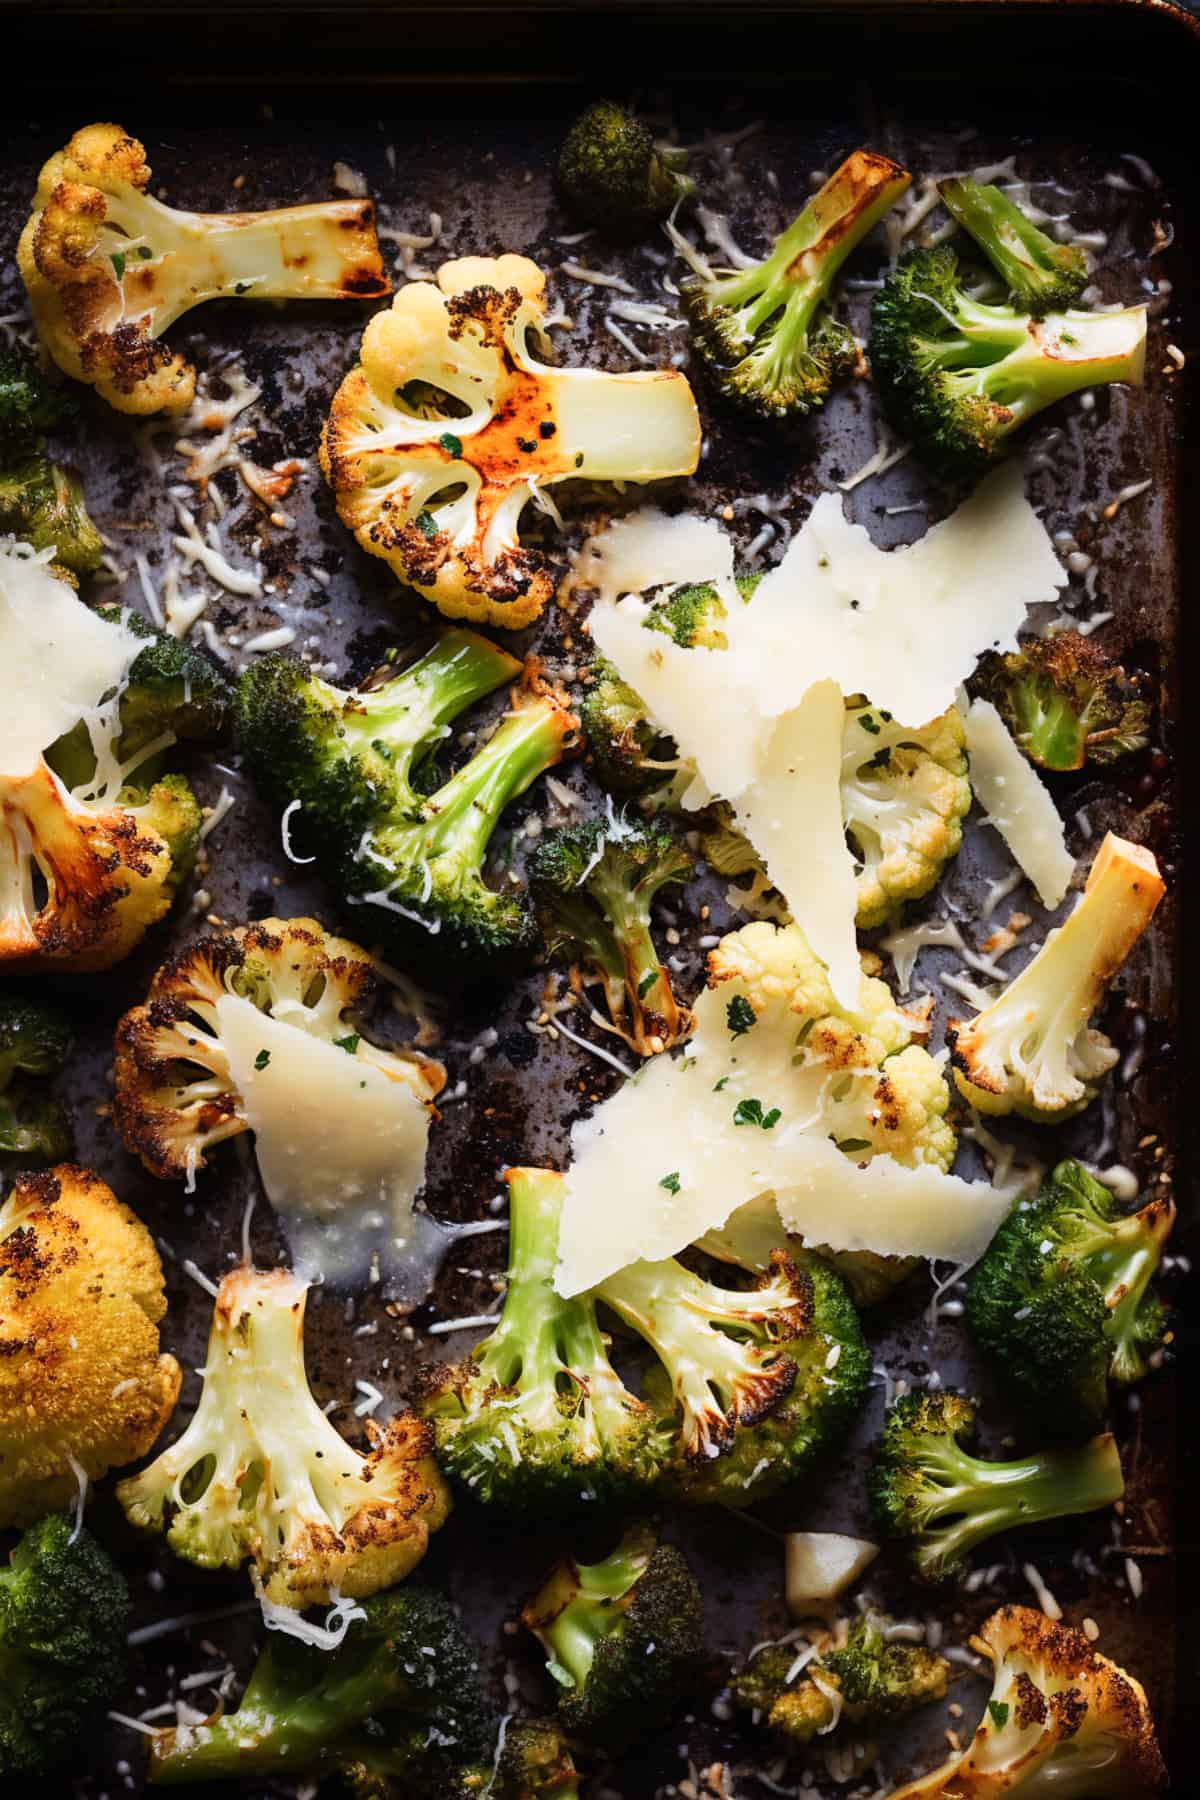 Roasted Cauliflower and Broccoli with parmesan on a baking tray.